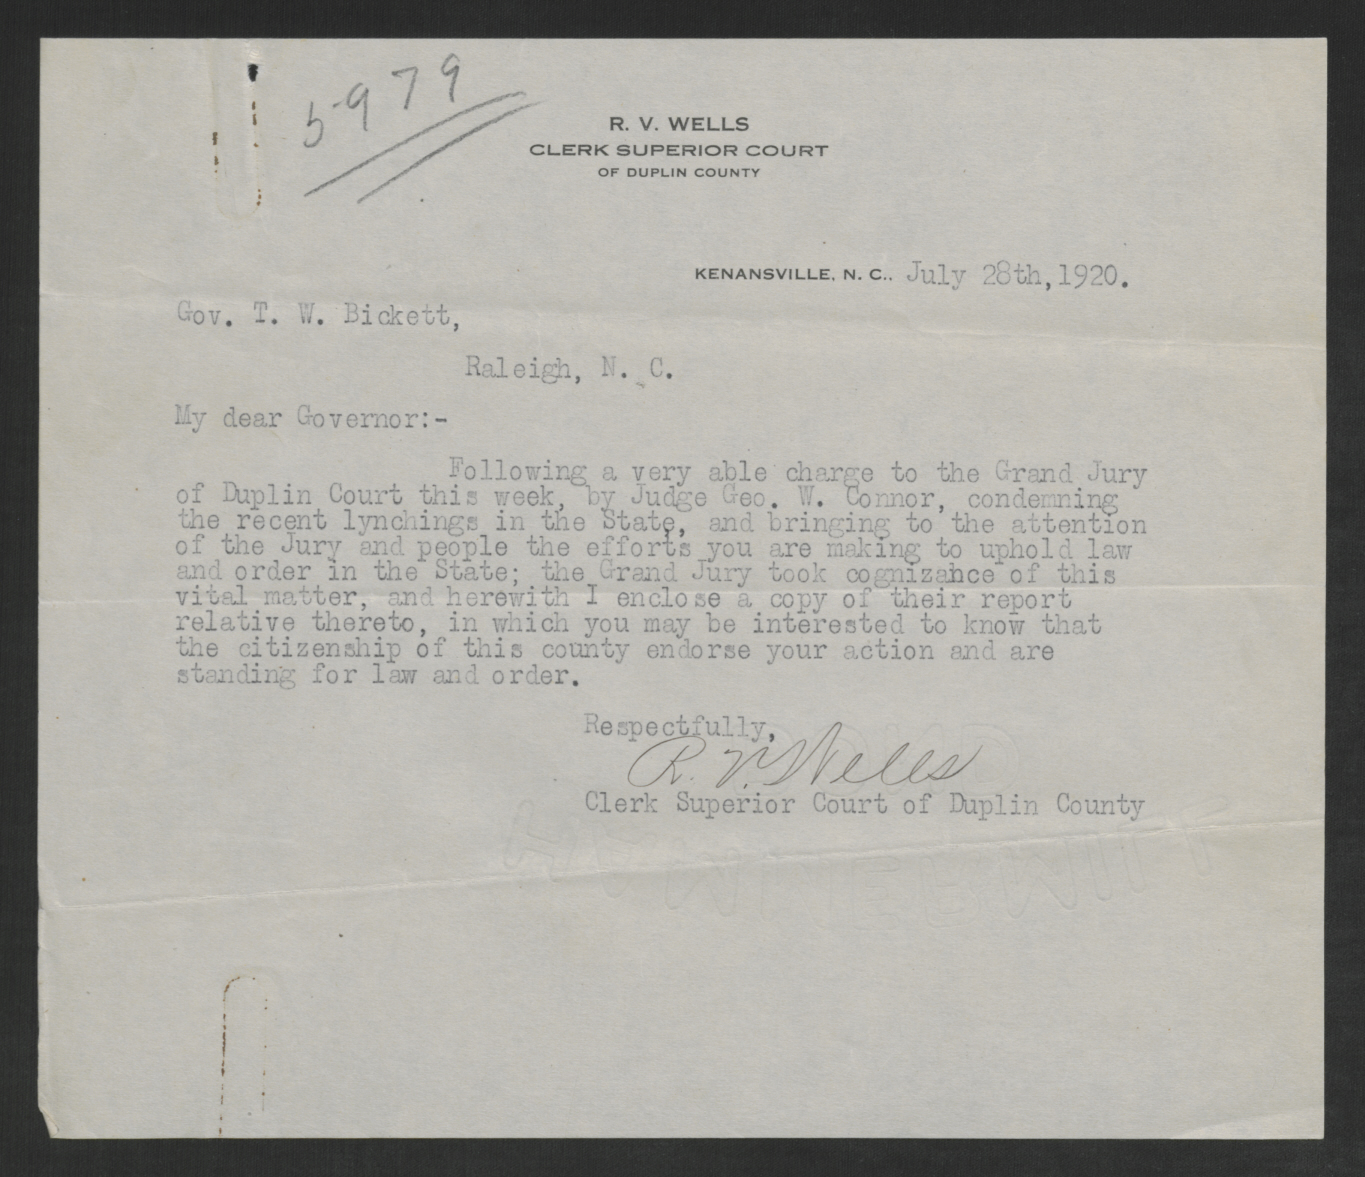 Letter from Robert V. Wells to Thomas W. Bickett, July 28, 1920